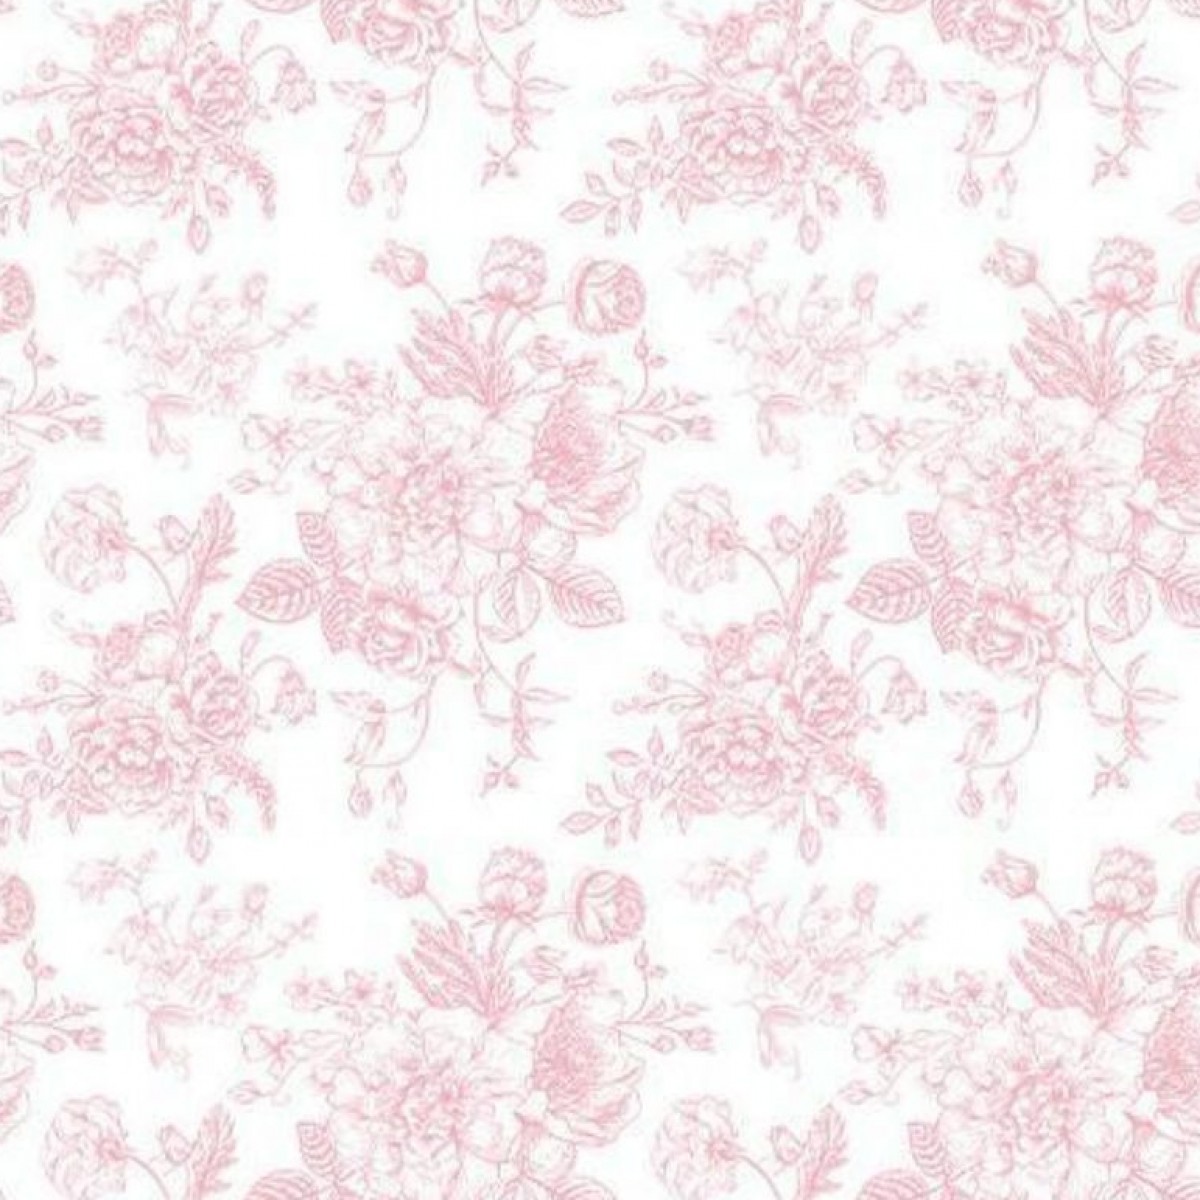 7839 Pink Ditsy Floral Print 58x58cm (20 Sheets)